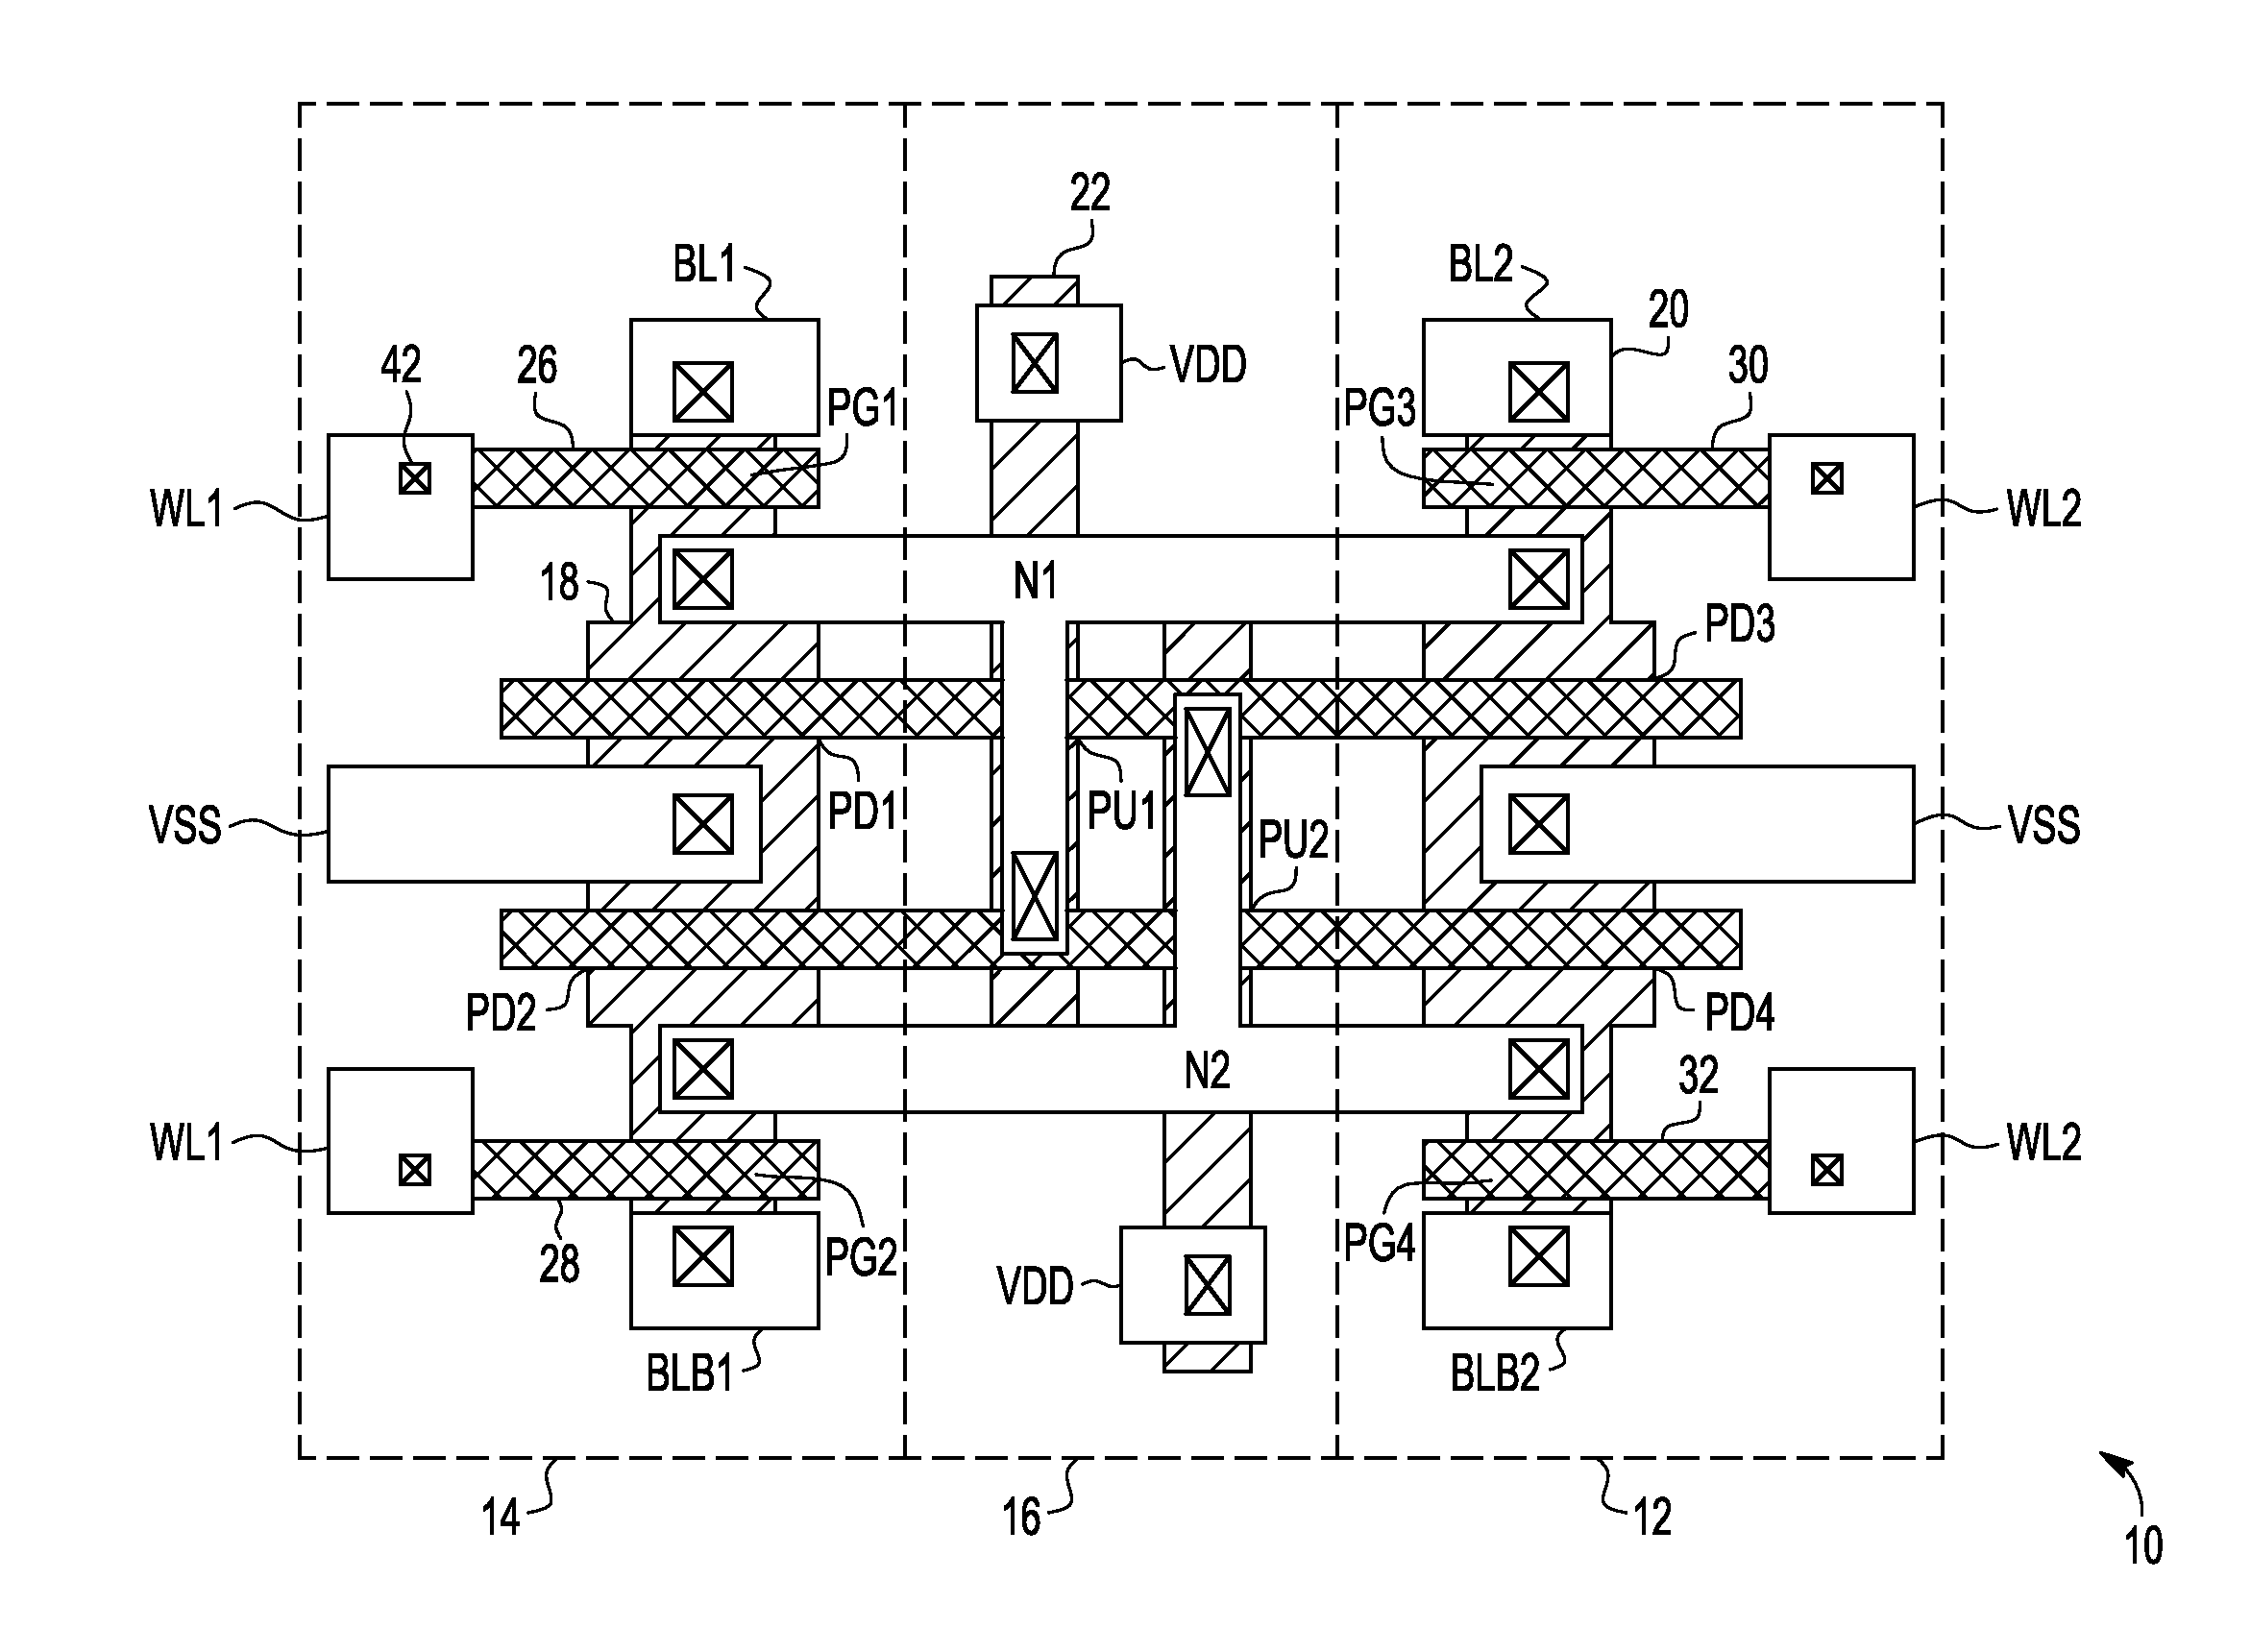 Dual port static random access memory cell layout